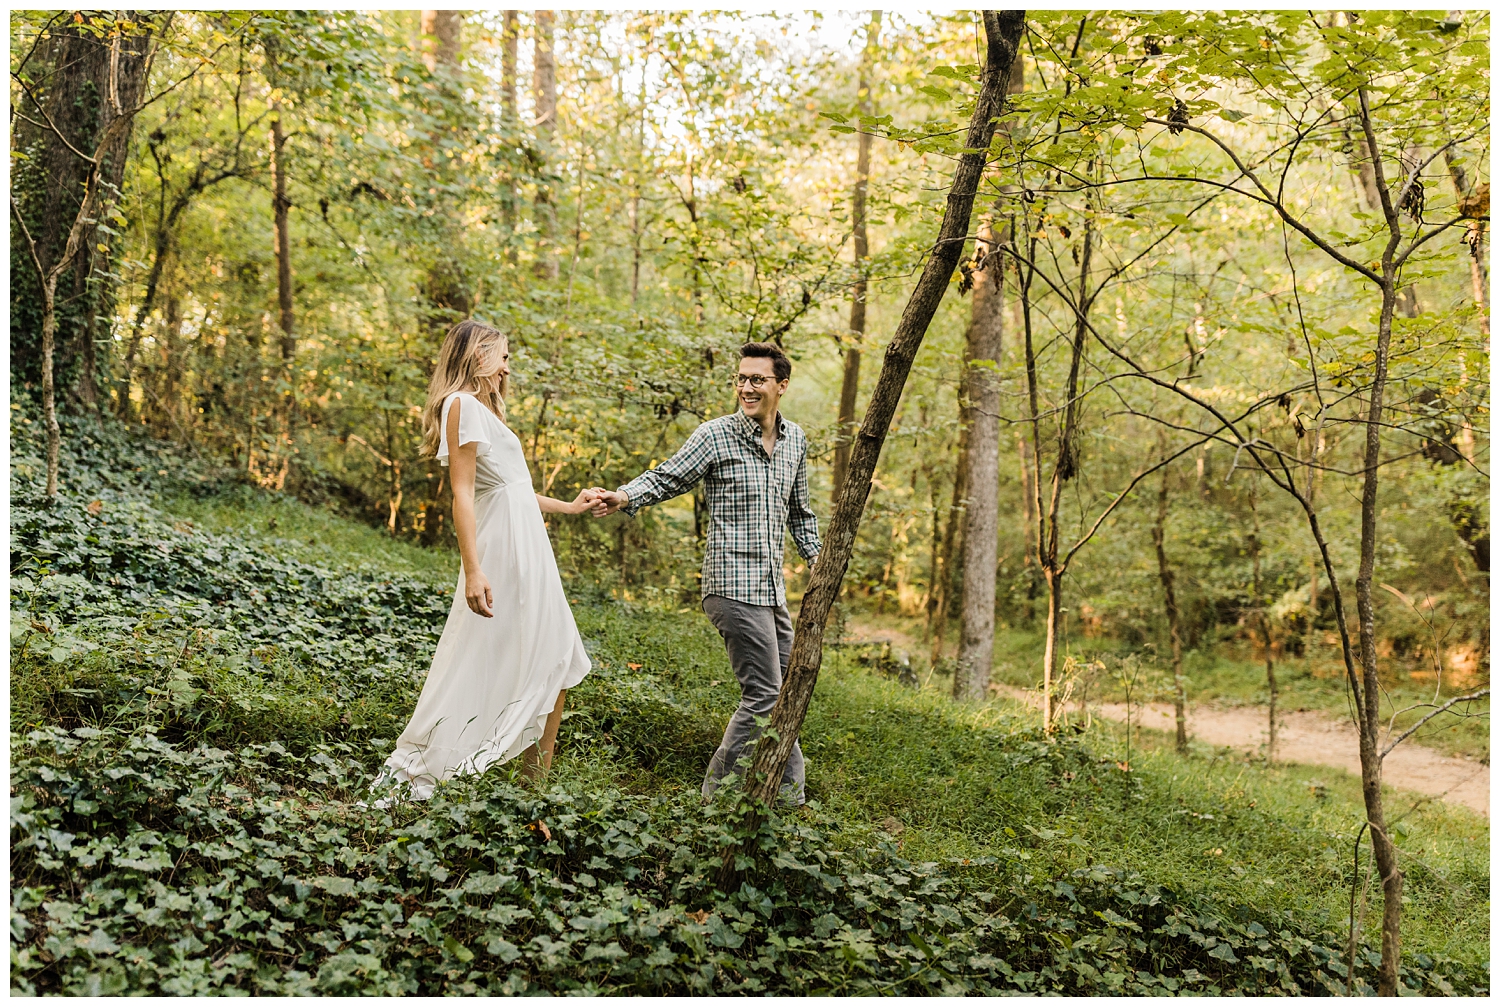 Newly engaged couple in Lullwater Park walking on a trail during an engagement session in a lush, green forest in Atlanta, GA